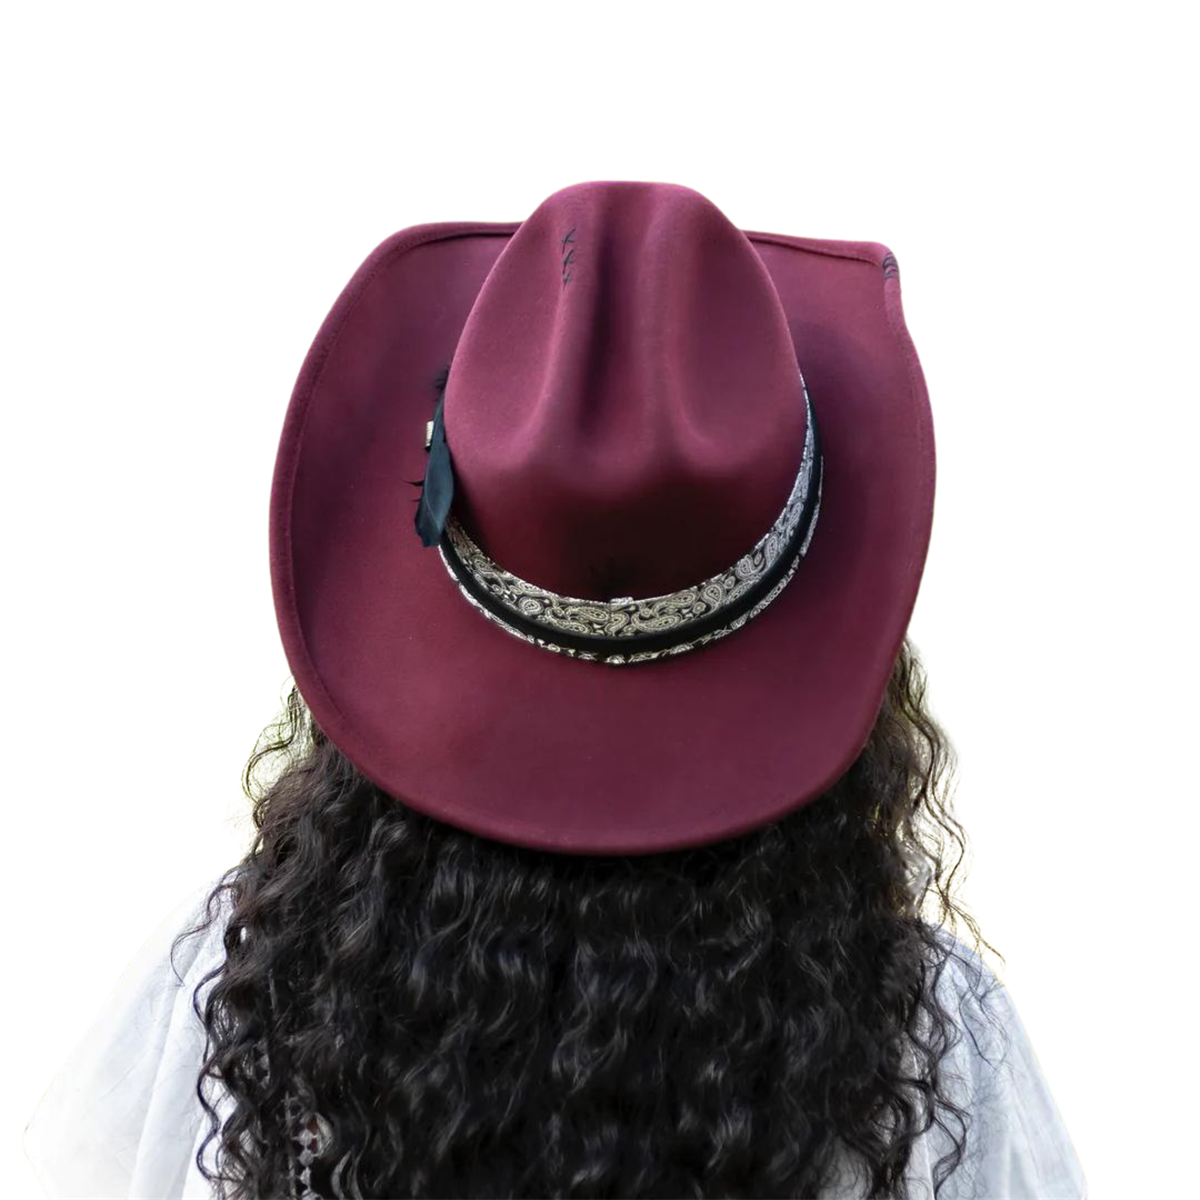 My Wine Hat - Paso Robles Rancher - Burgundy